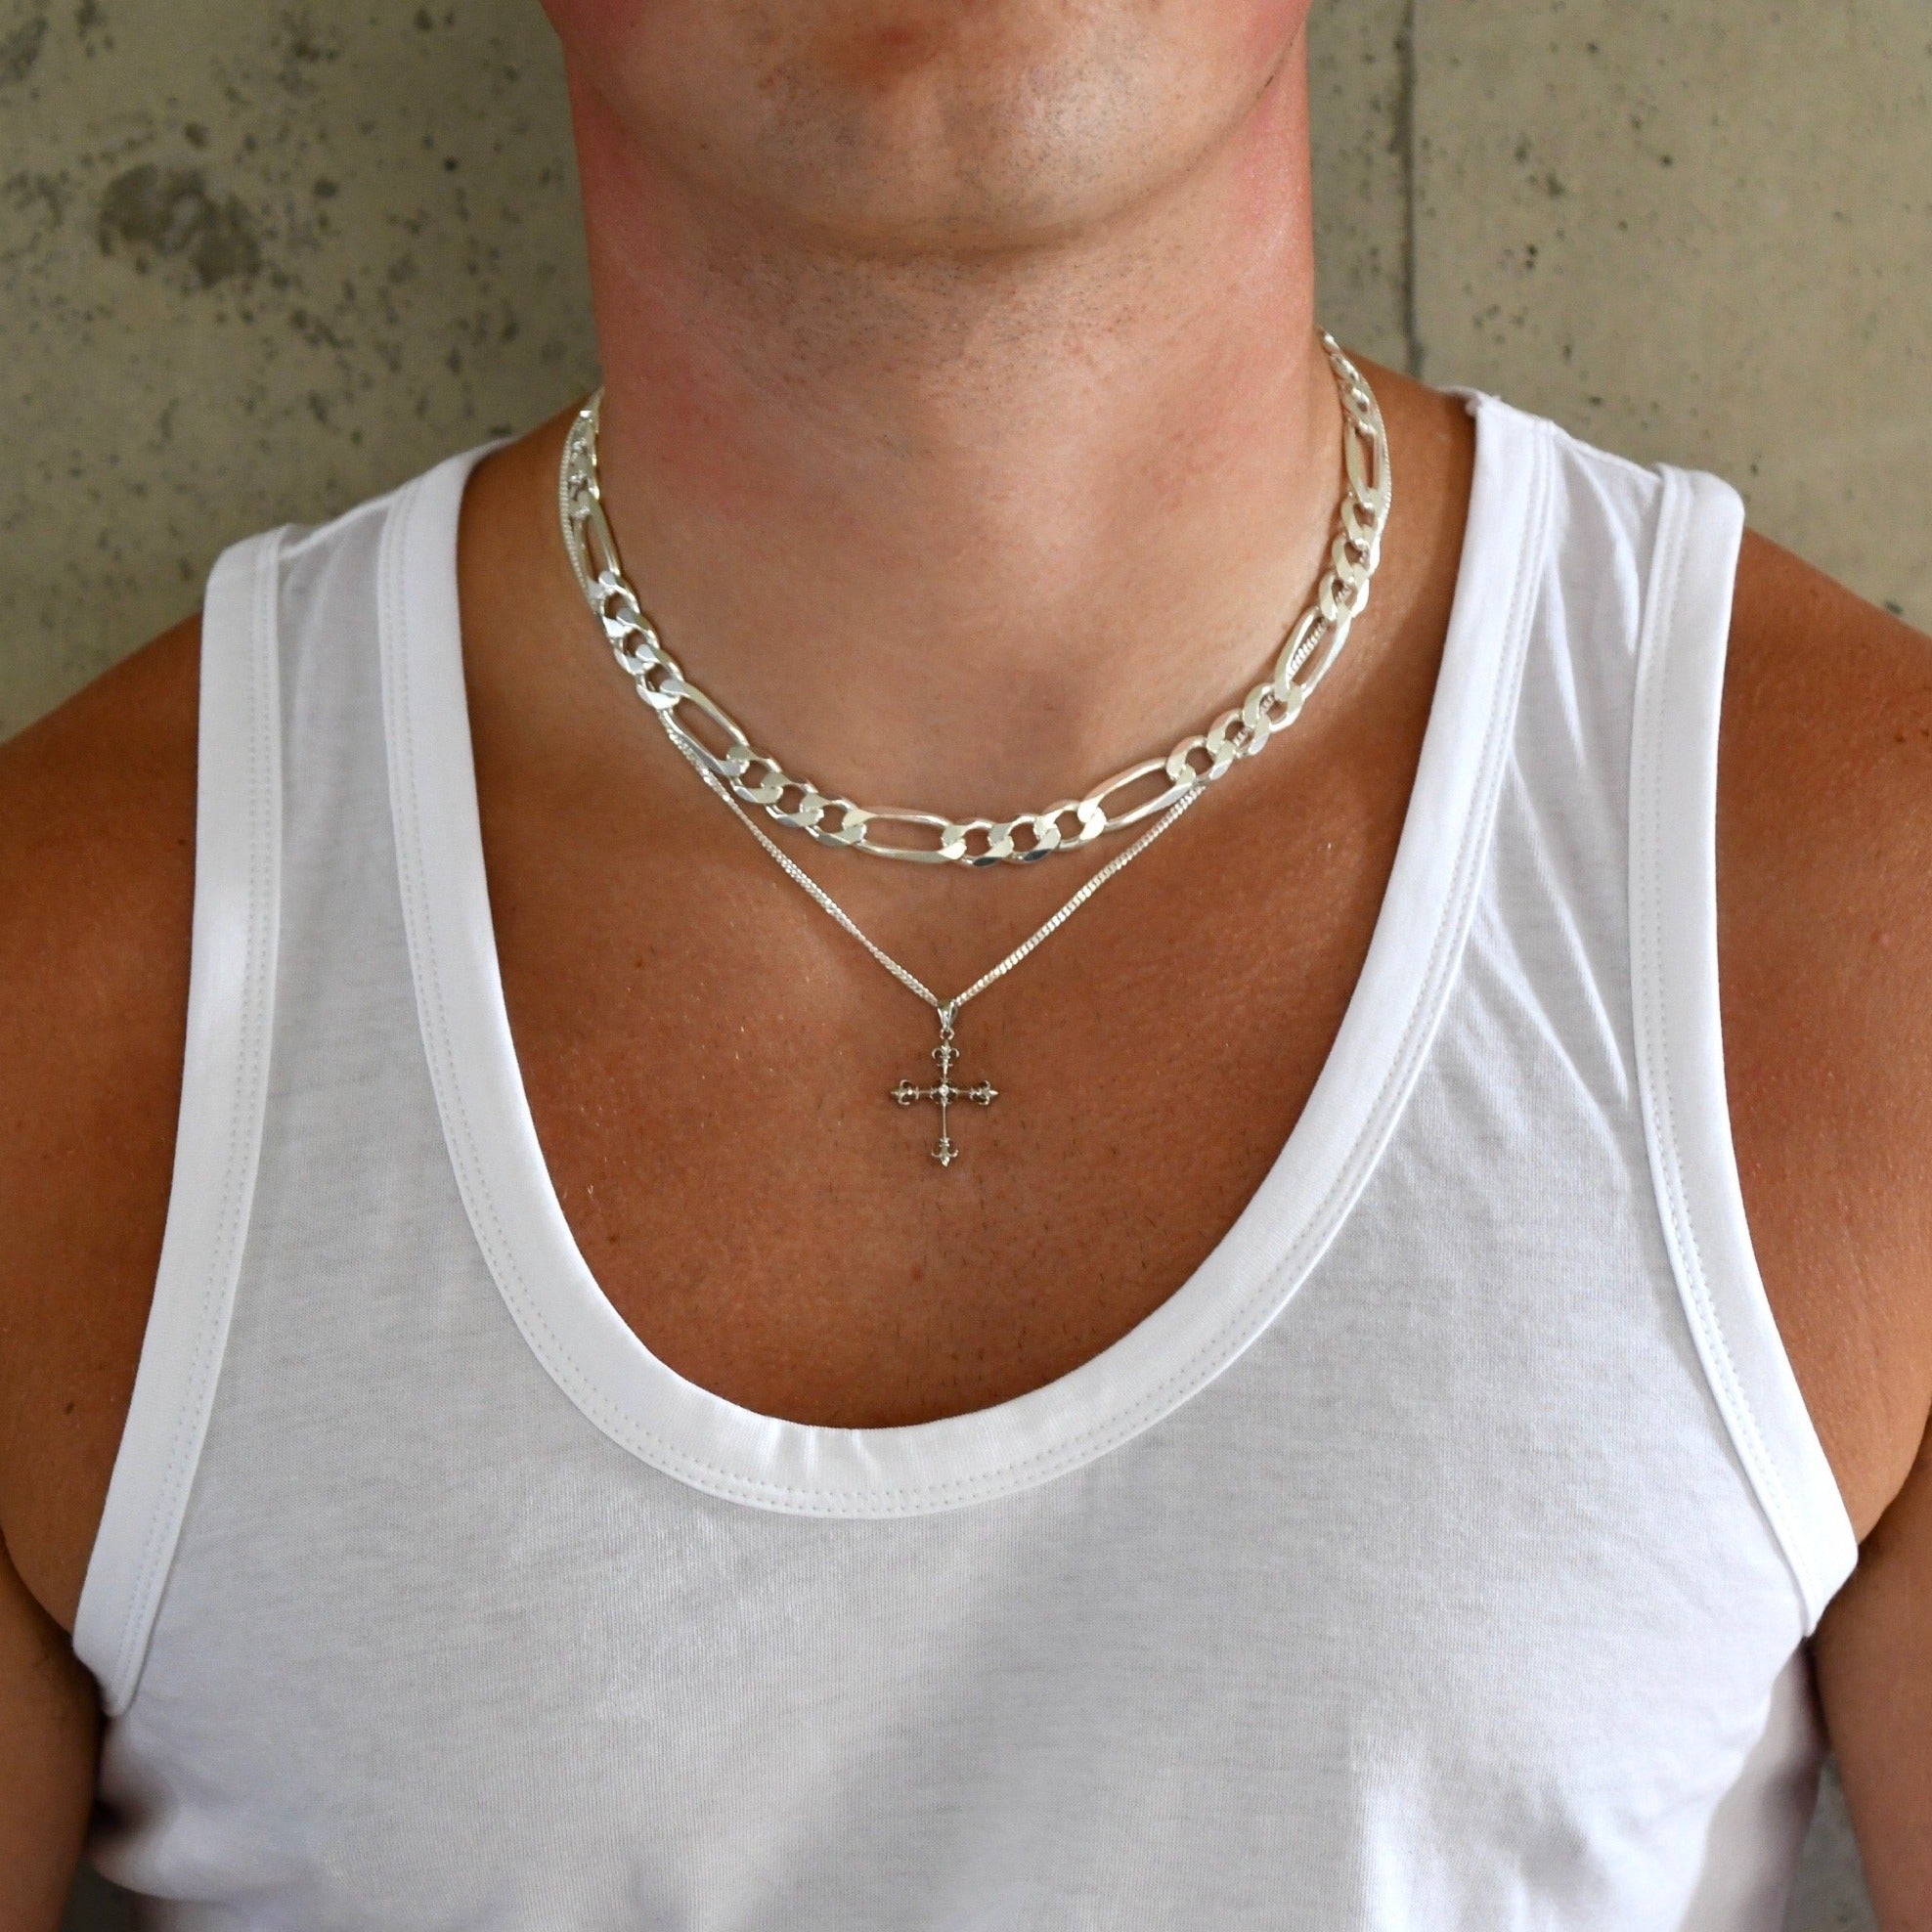 ATROFY Layered Cross Necklace for Men Boys Stainless Steel Layered Snake  Chain Cuban Link Chain 16-24 inch Christian Cross Pendant Religious Jewelry  Gifts | Amazon.com